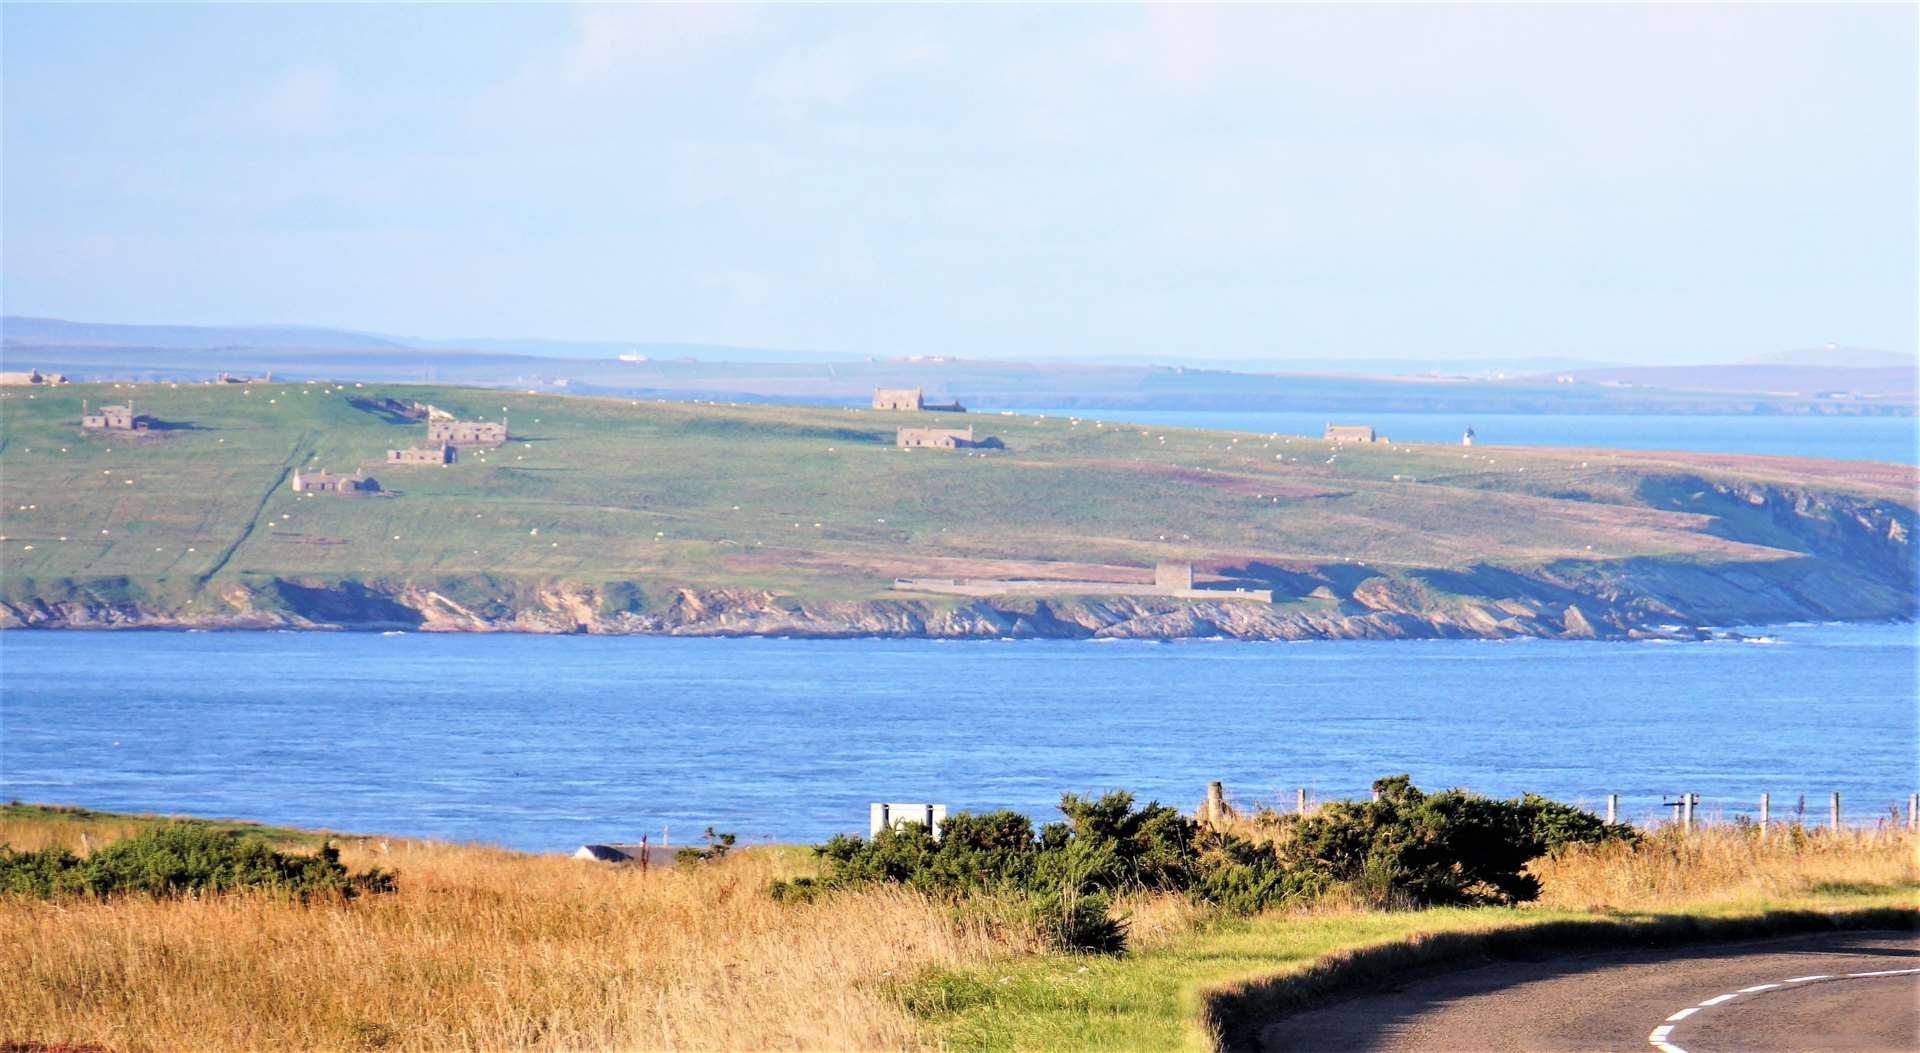 The island of Stroma seen from the A99 road near john O'Groats. Picture: DGS